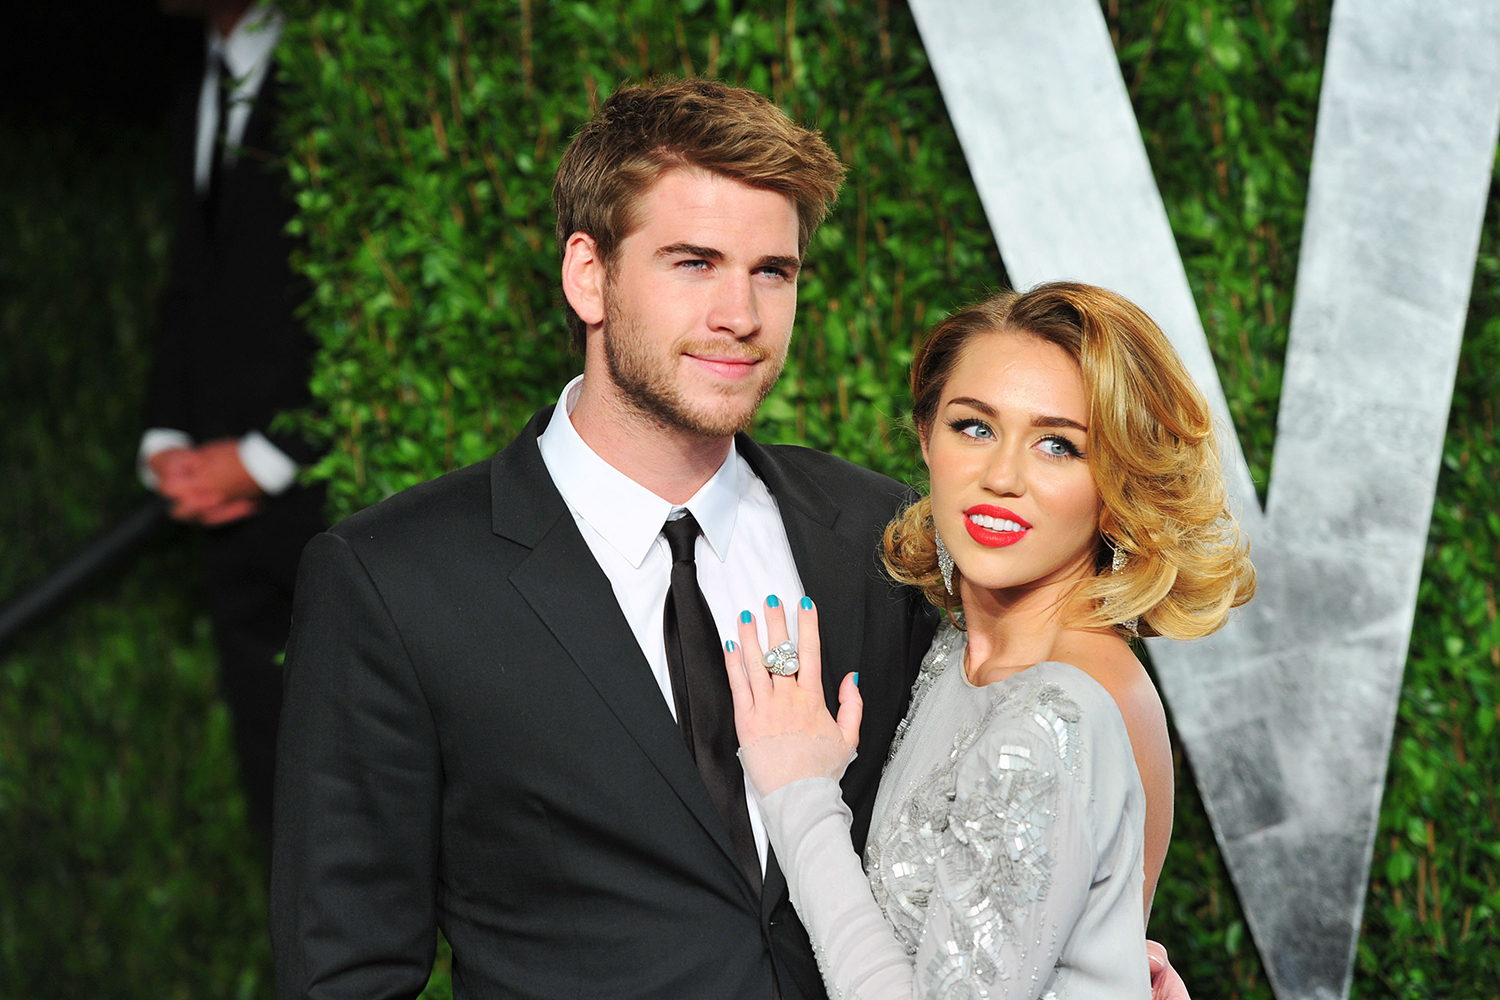 Miley Cyrus And Liam Hemsworth Spotted Wearing Matching Wedding Rings